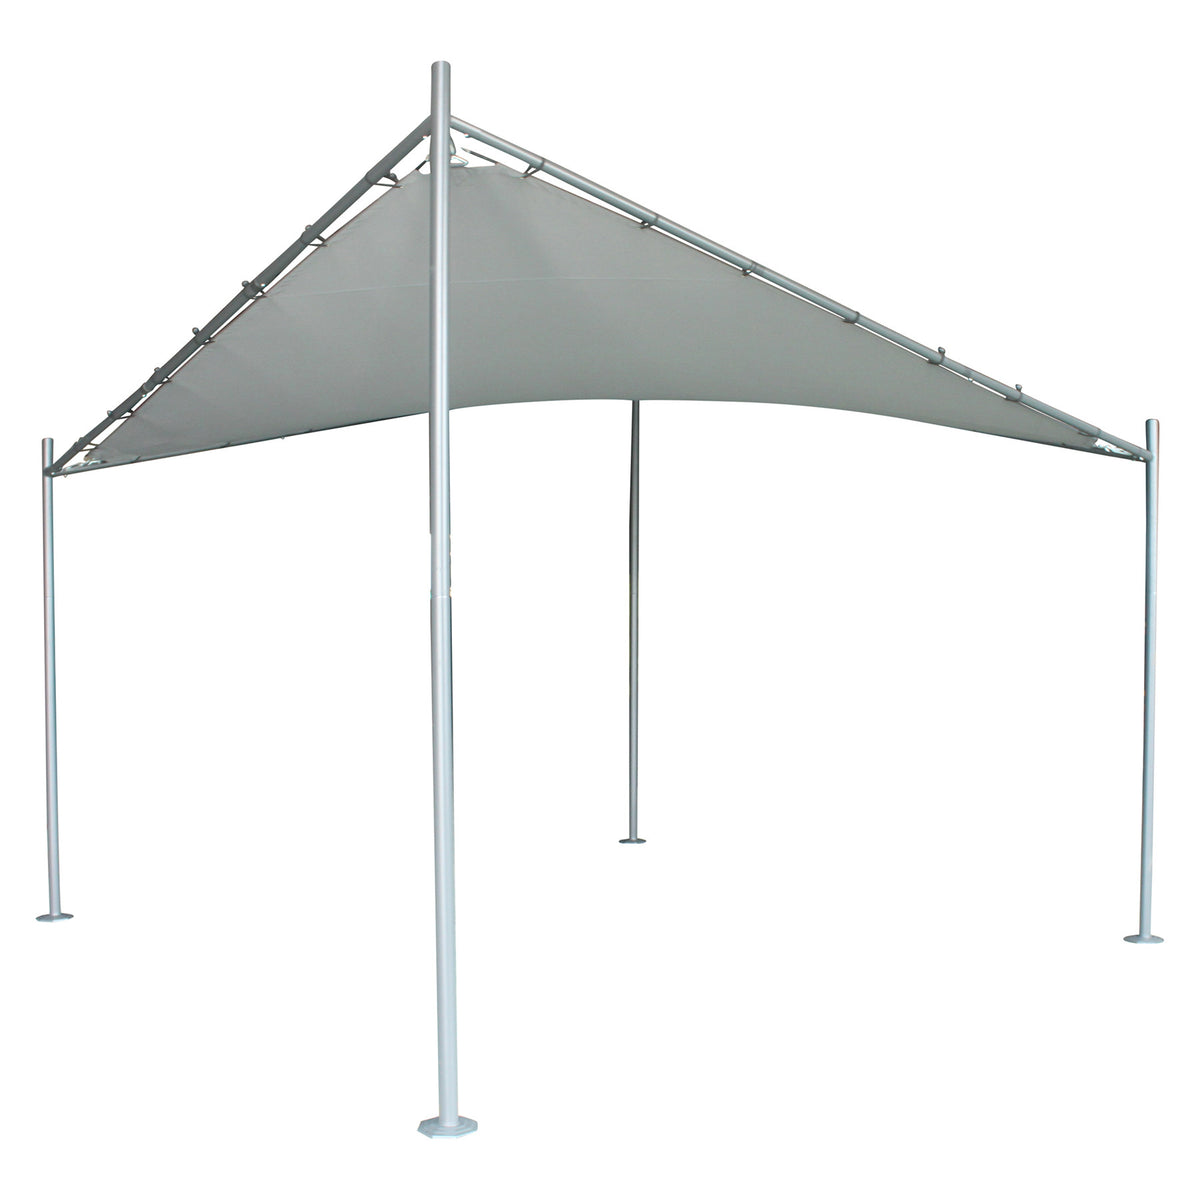 LG Outdoor Rodin 3.5m Sail Awning and Poles - Grey